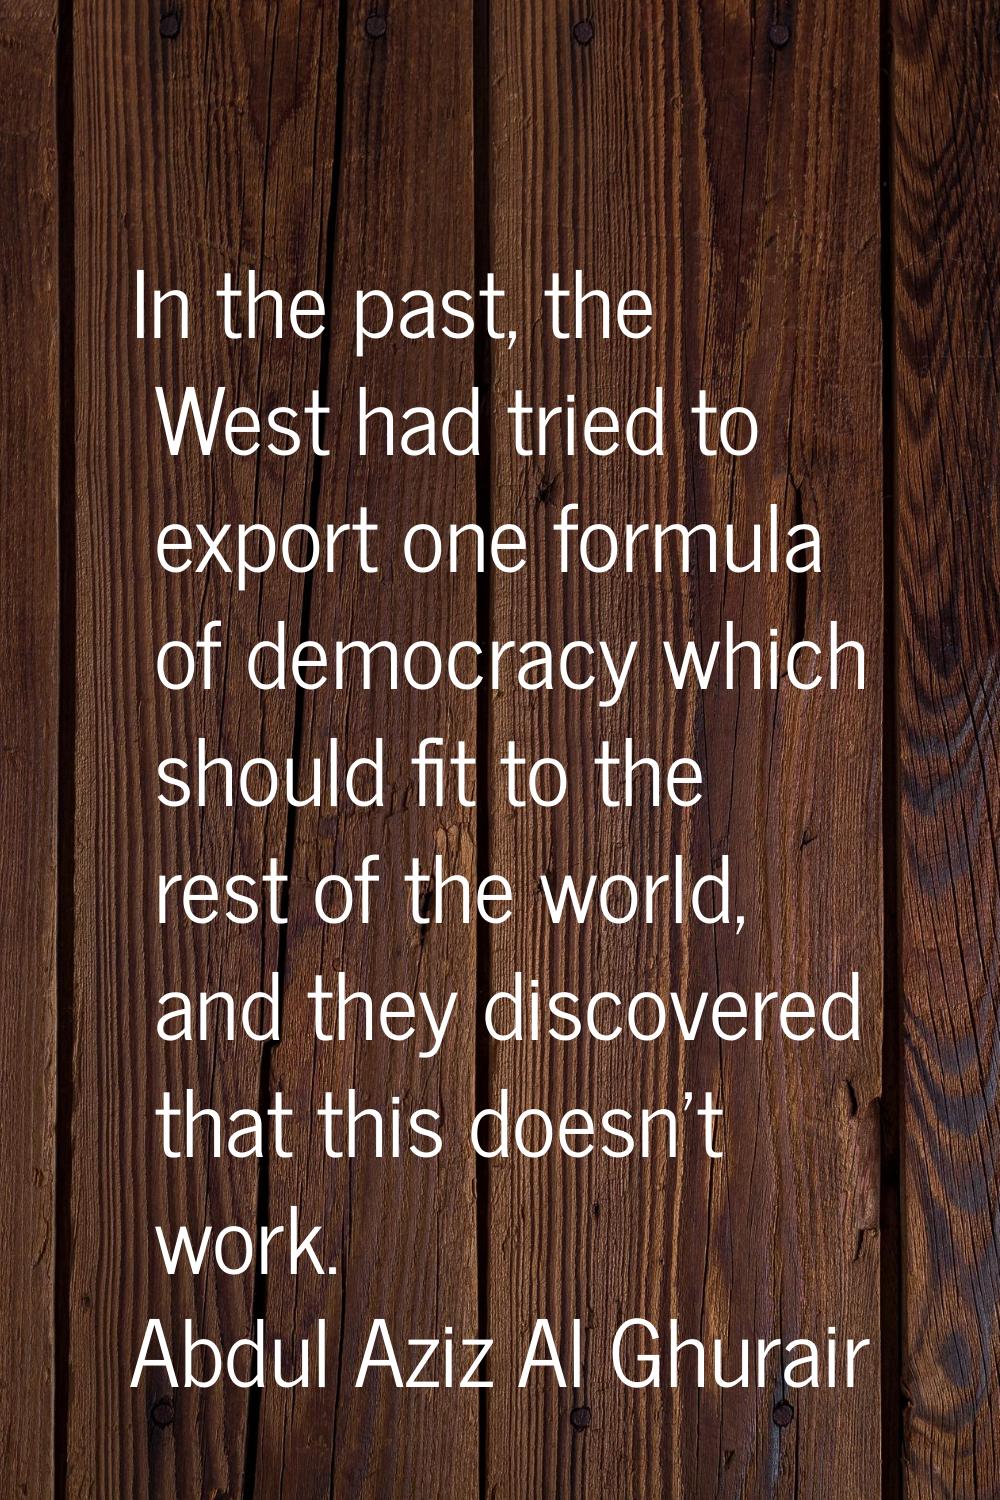 In the past, the West had tried to export one formula of democracy which should fit to the rest of 